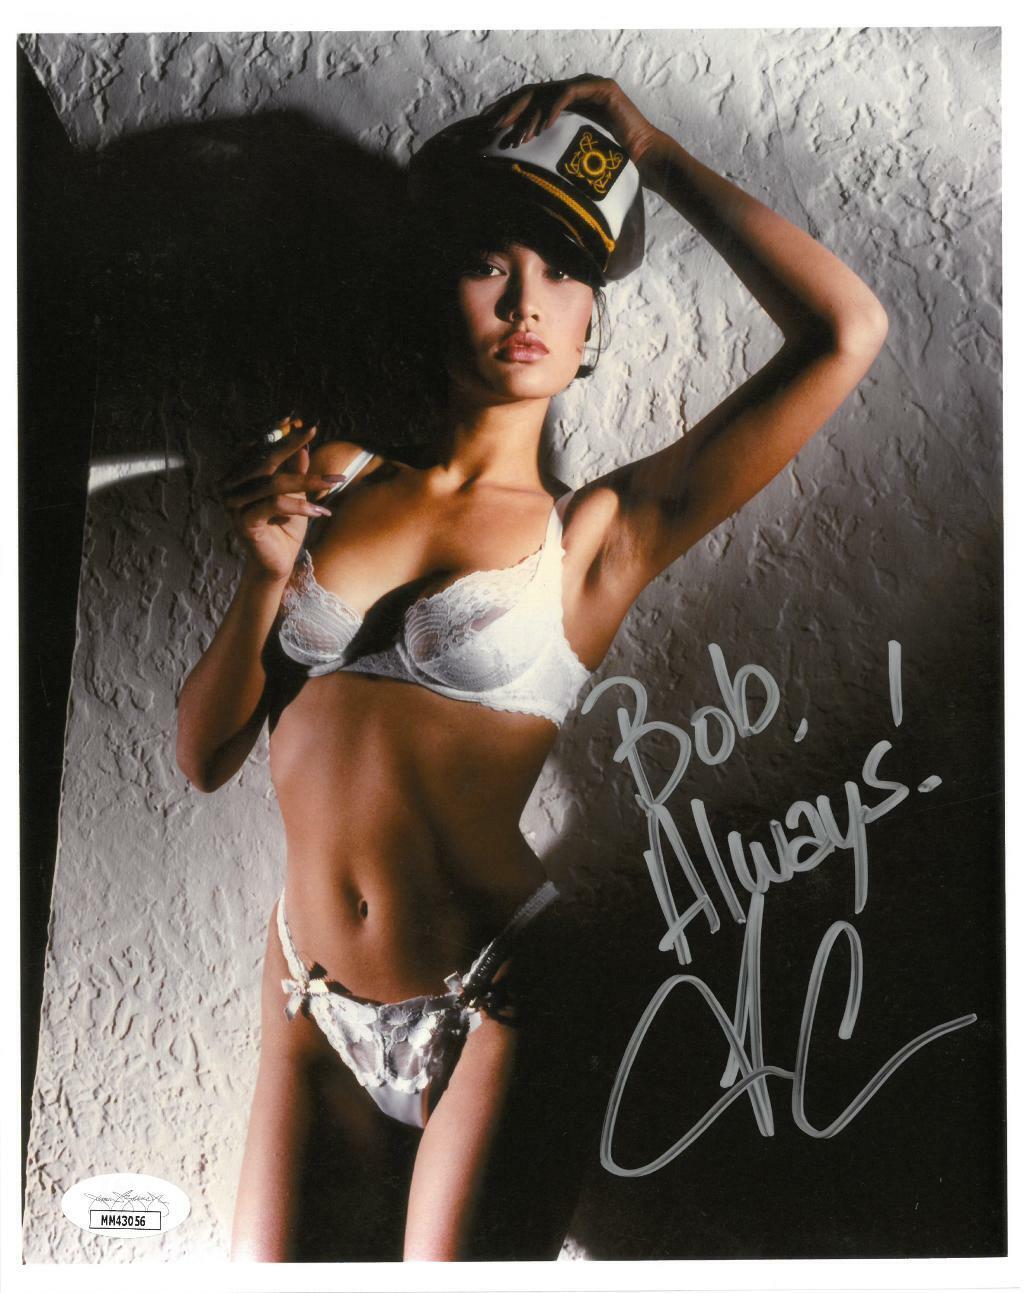 Tia Carrerra Signed Authentic Autographed 8x10 Photo Poster painting JSA #MM43056